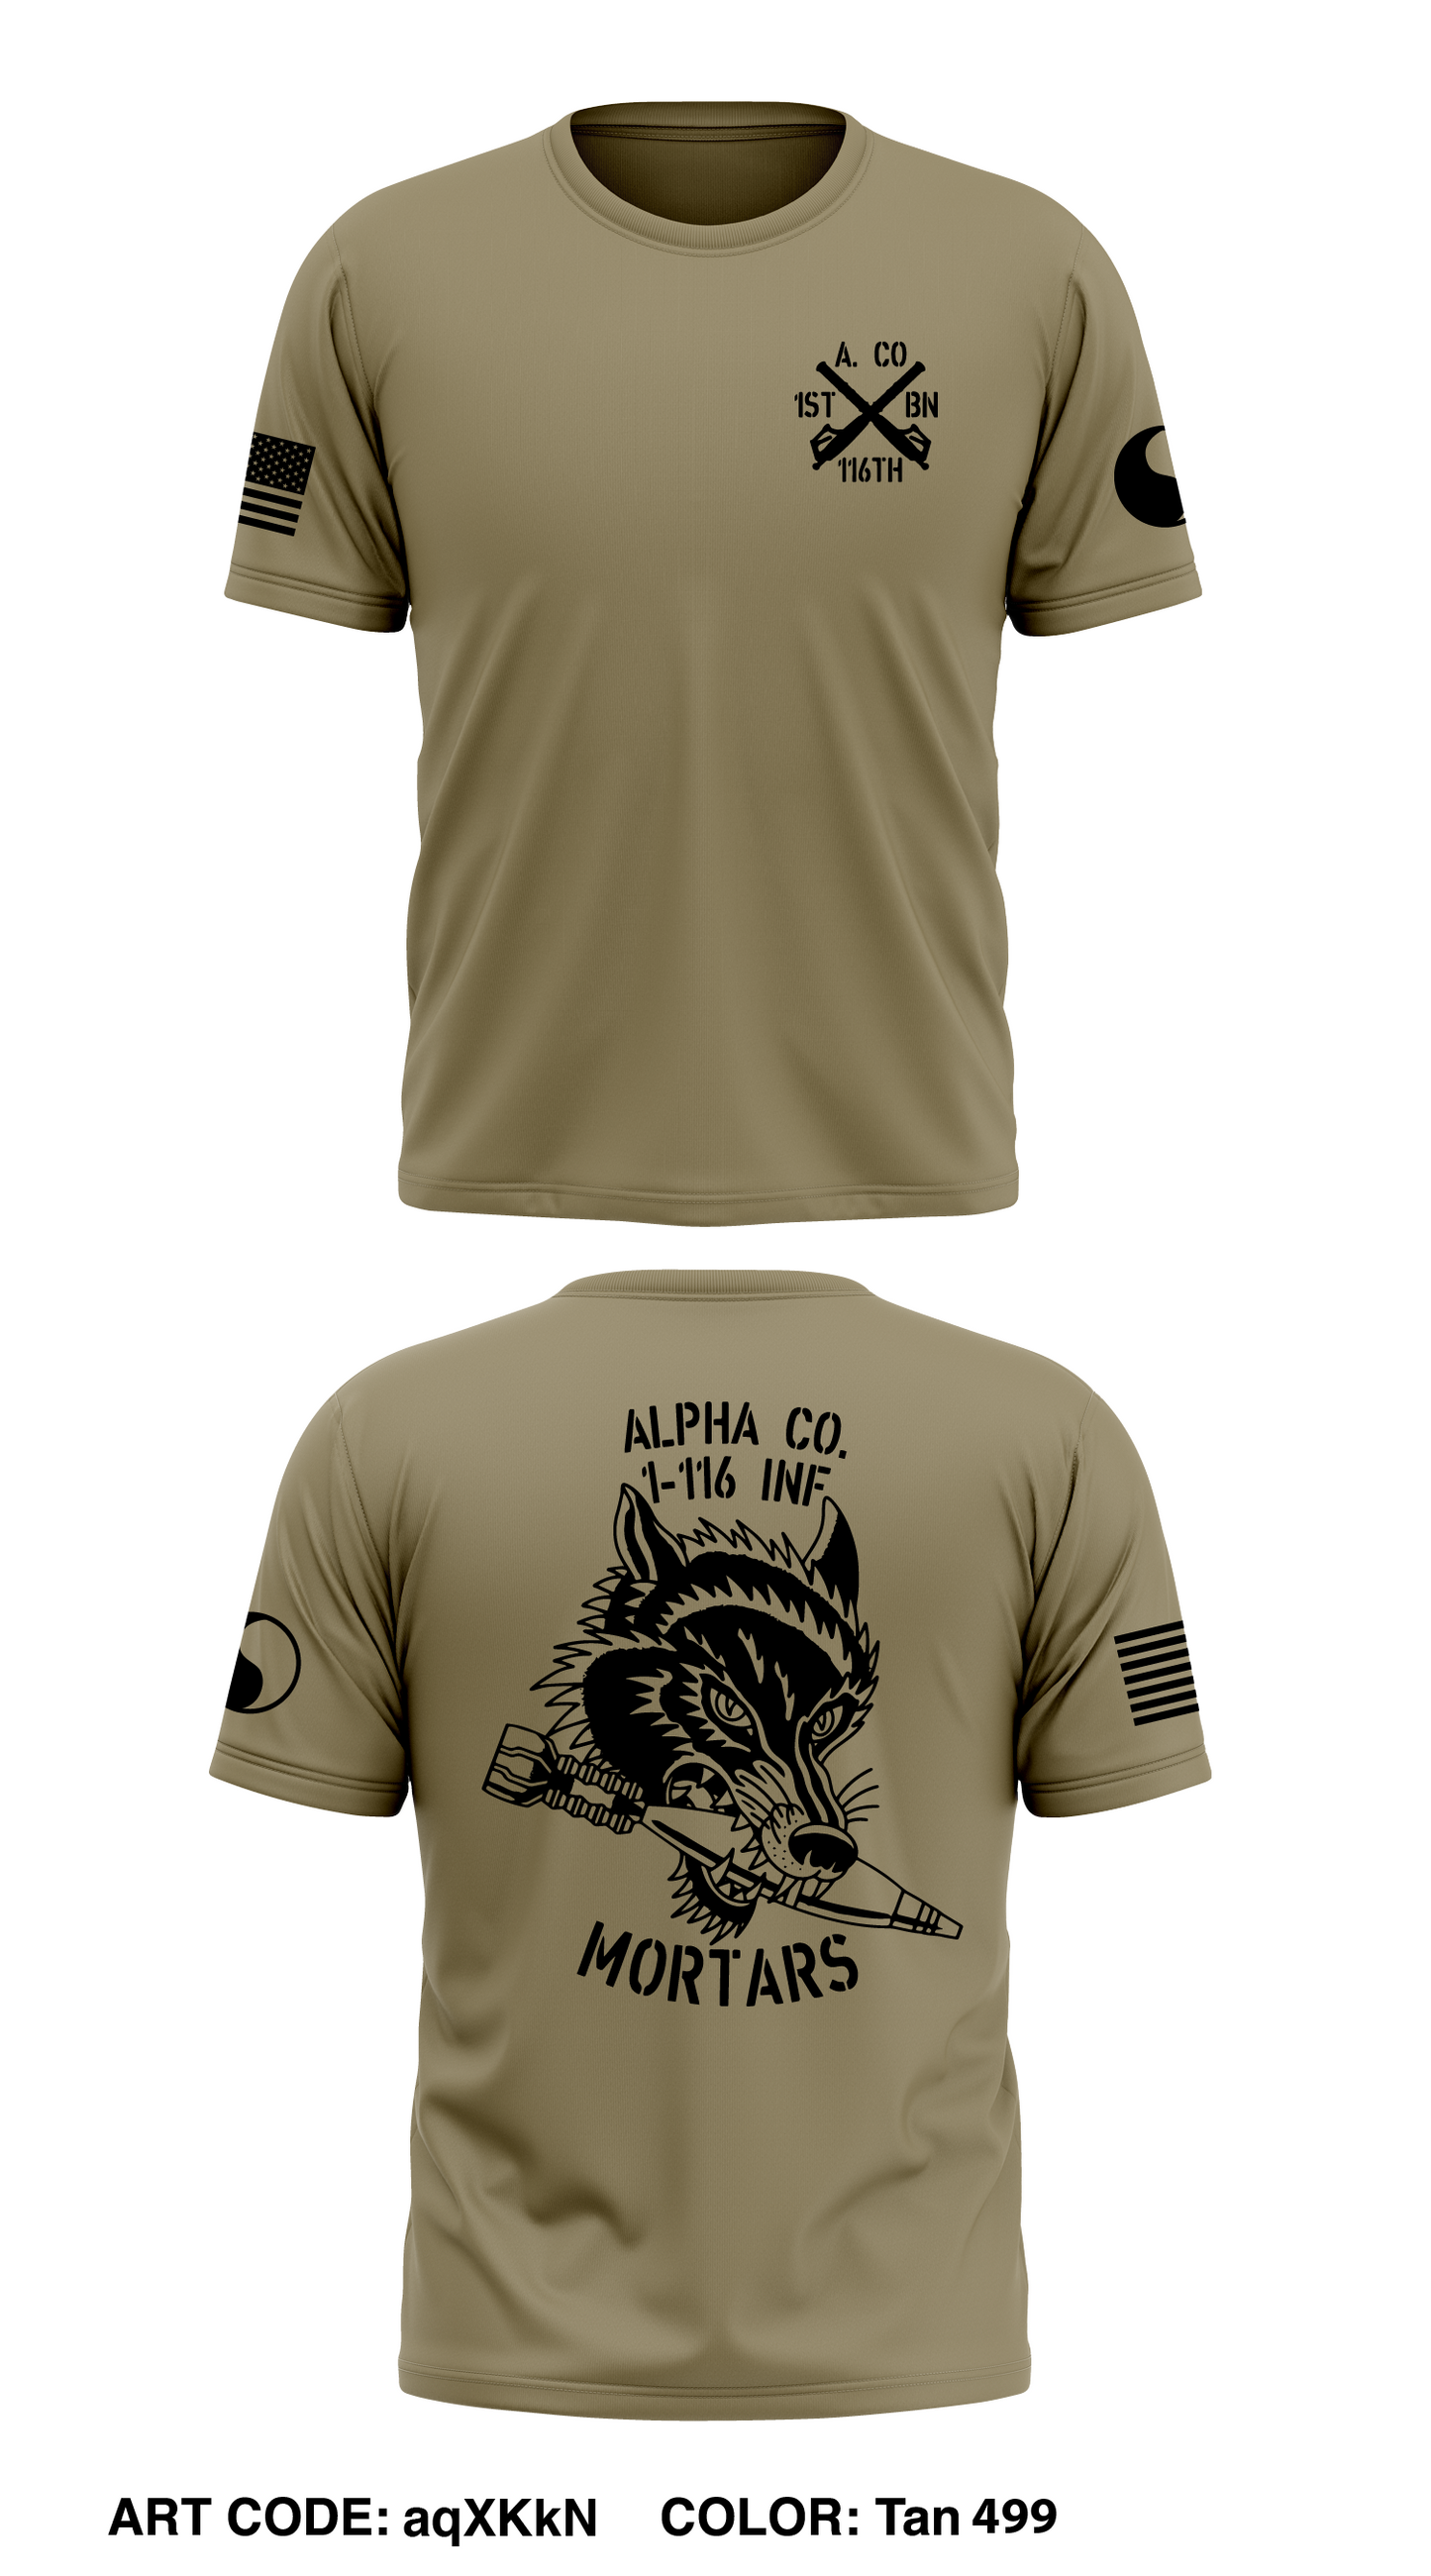 Alpha Company 1-116 INF, Mortars Section Store 1 Core Men's SS Performance Tee - aqXKkN